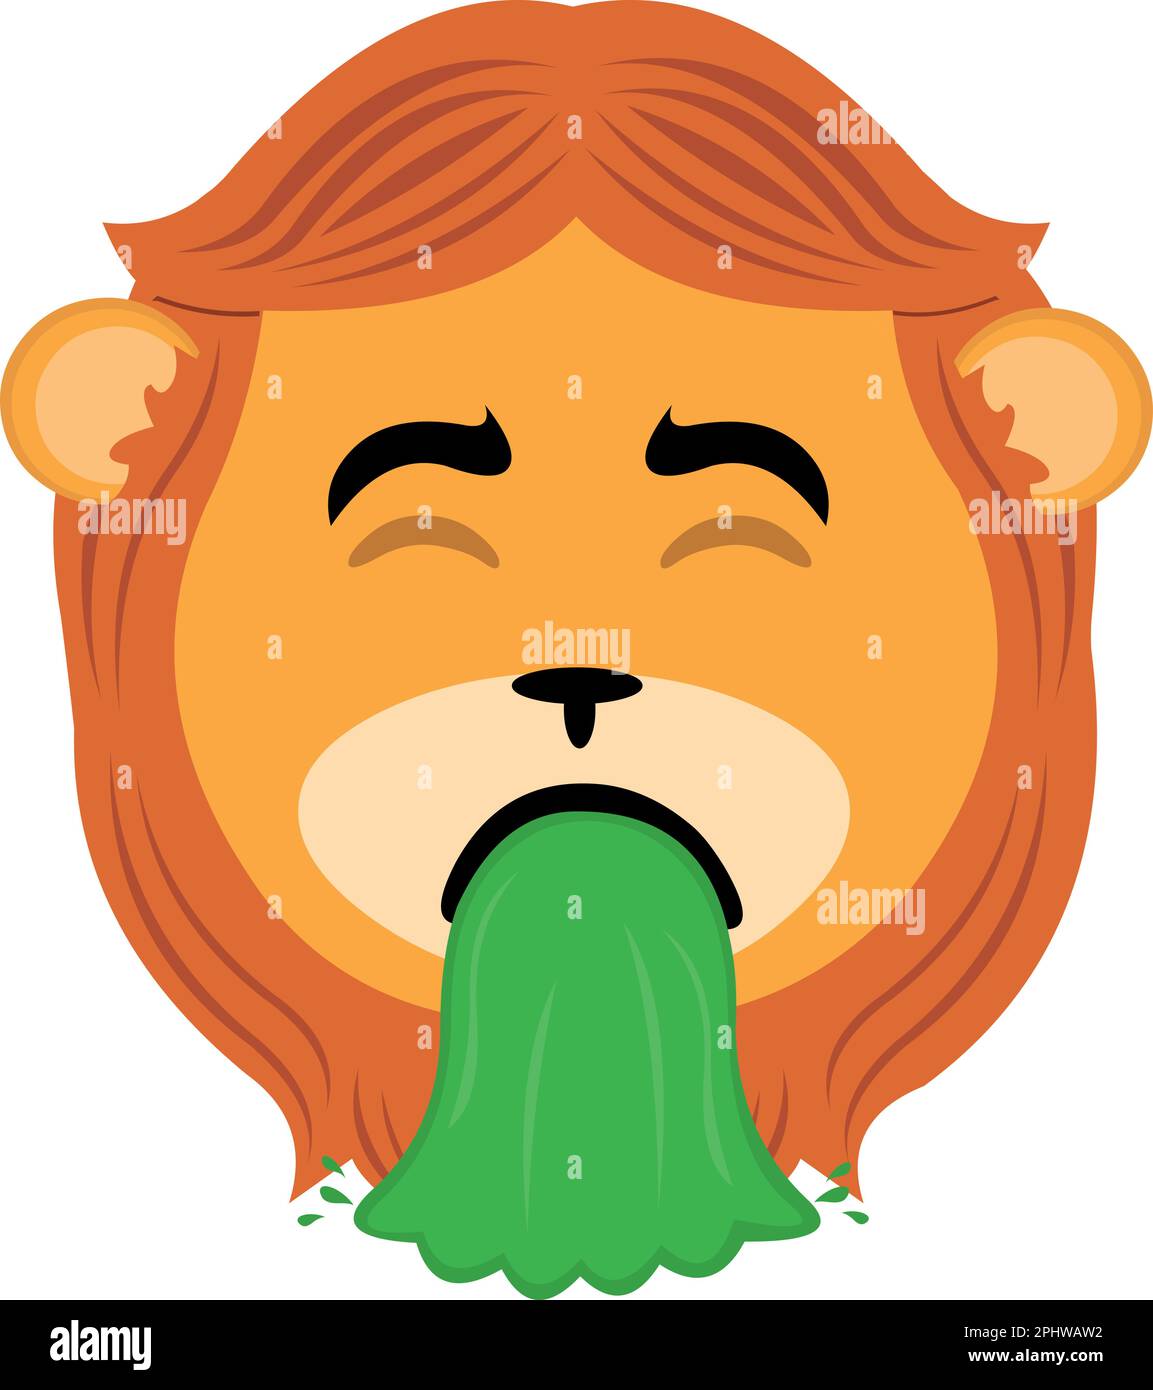 vector illustration face of a lion cartoon vomiting Stock Vector